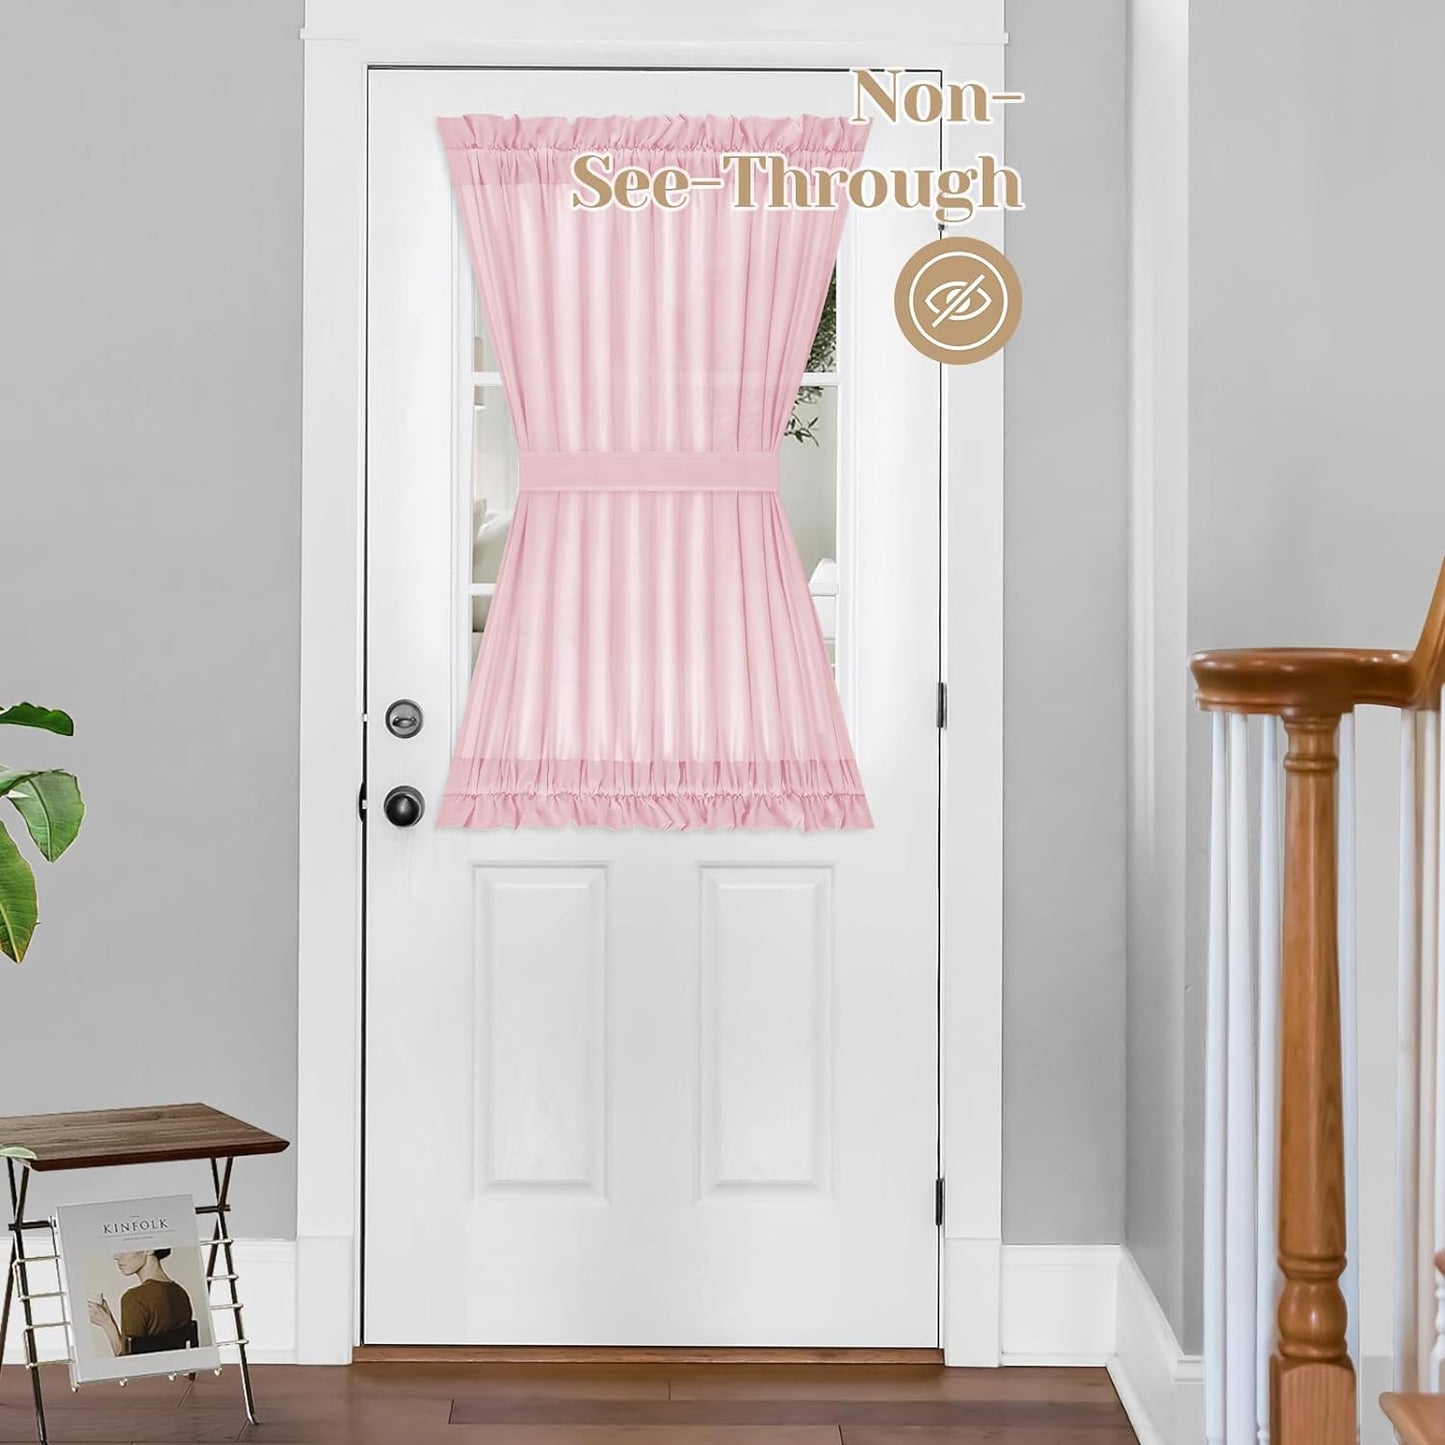 HOMEIDEAS Non-See-Through Sidelight Curtains for Front Door, Privacy Semi Sheer Door Window Curtains, Rod Pocket Light Filtering French Door Curtains with Tieback, (1 Panel, White, 26W X 72L)  HOMEIDEAS Light Pink 1 Panel-54 X 40 